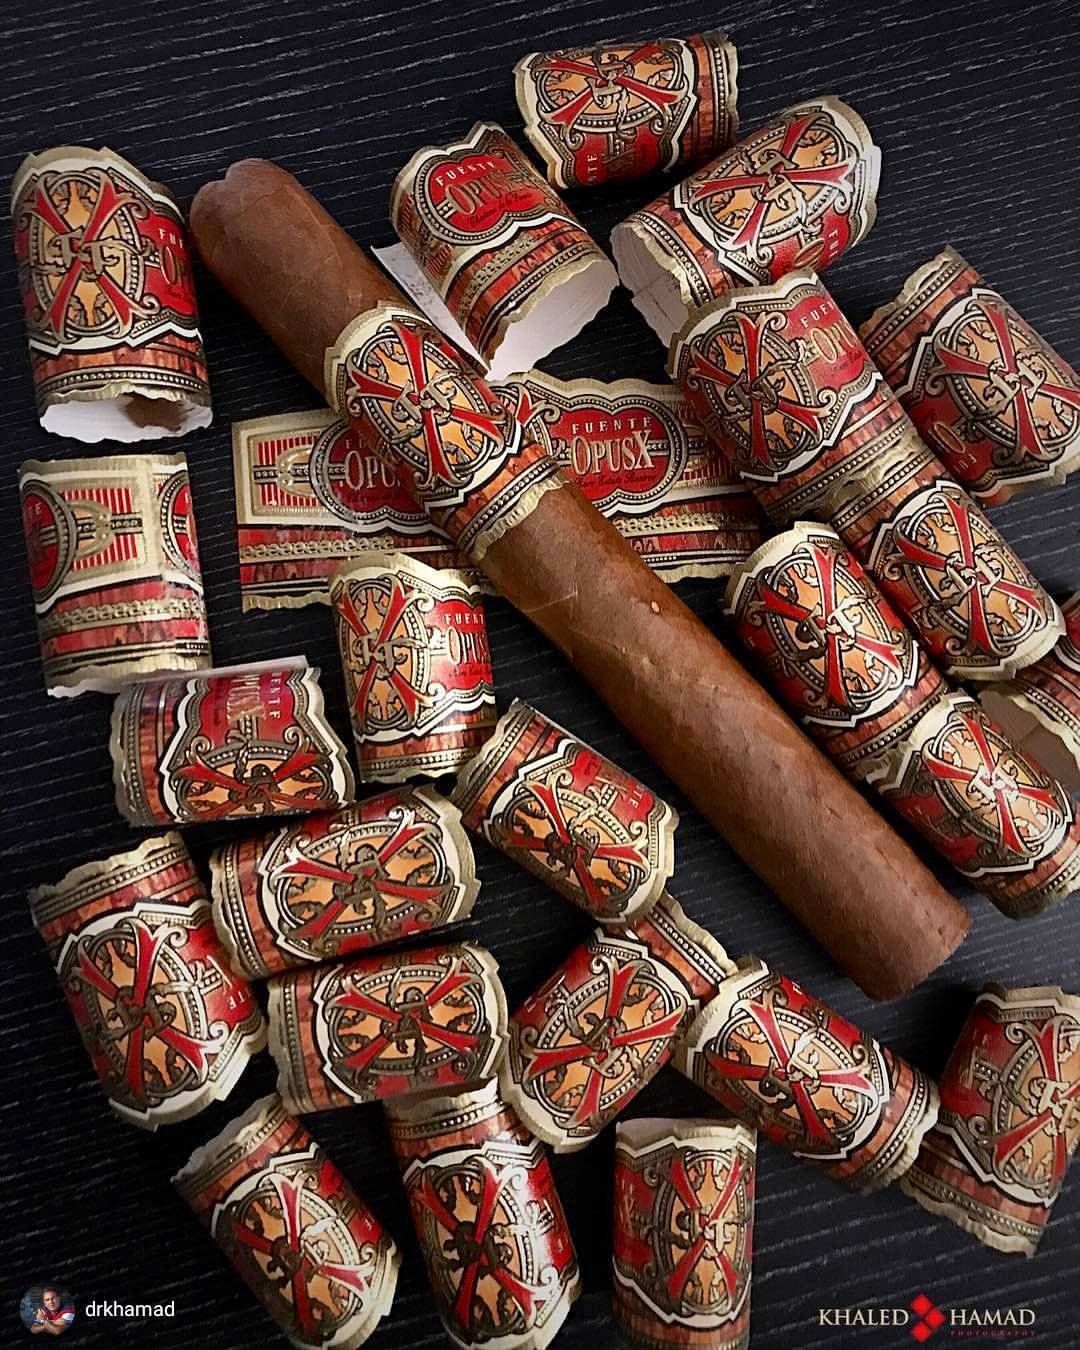 🔥💨👌
#FuenteFriday
#Repost 📸 from @drkhamad
WWW.CIGARSANDWHISKEYS.COM
Like 👍, Repost 🔃, Tag 🔖 Follow 👣 Us & Subscribe ✍...